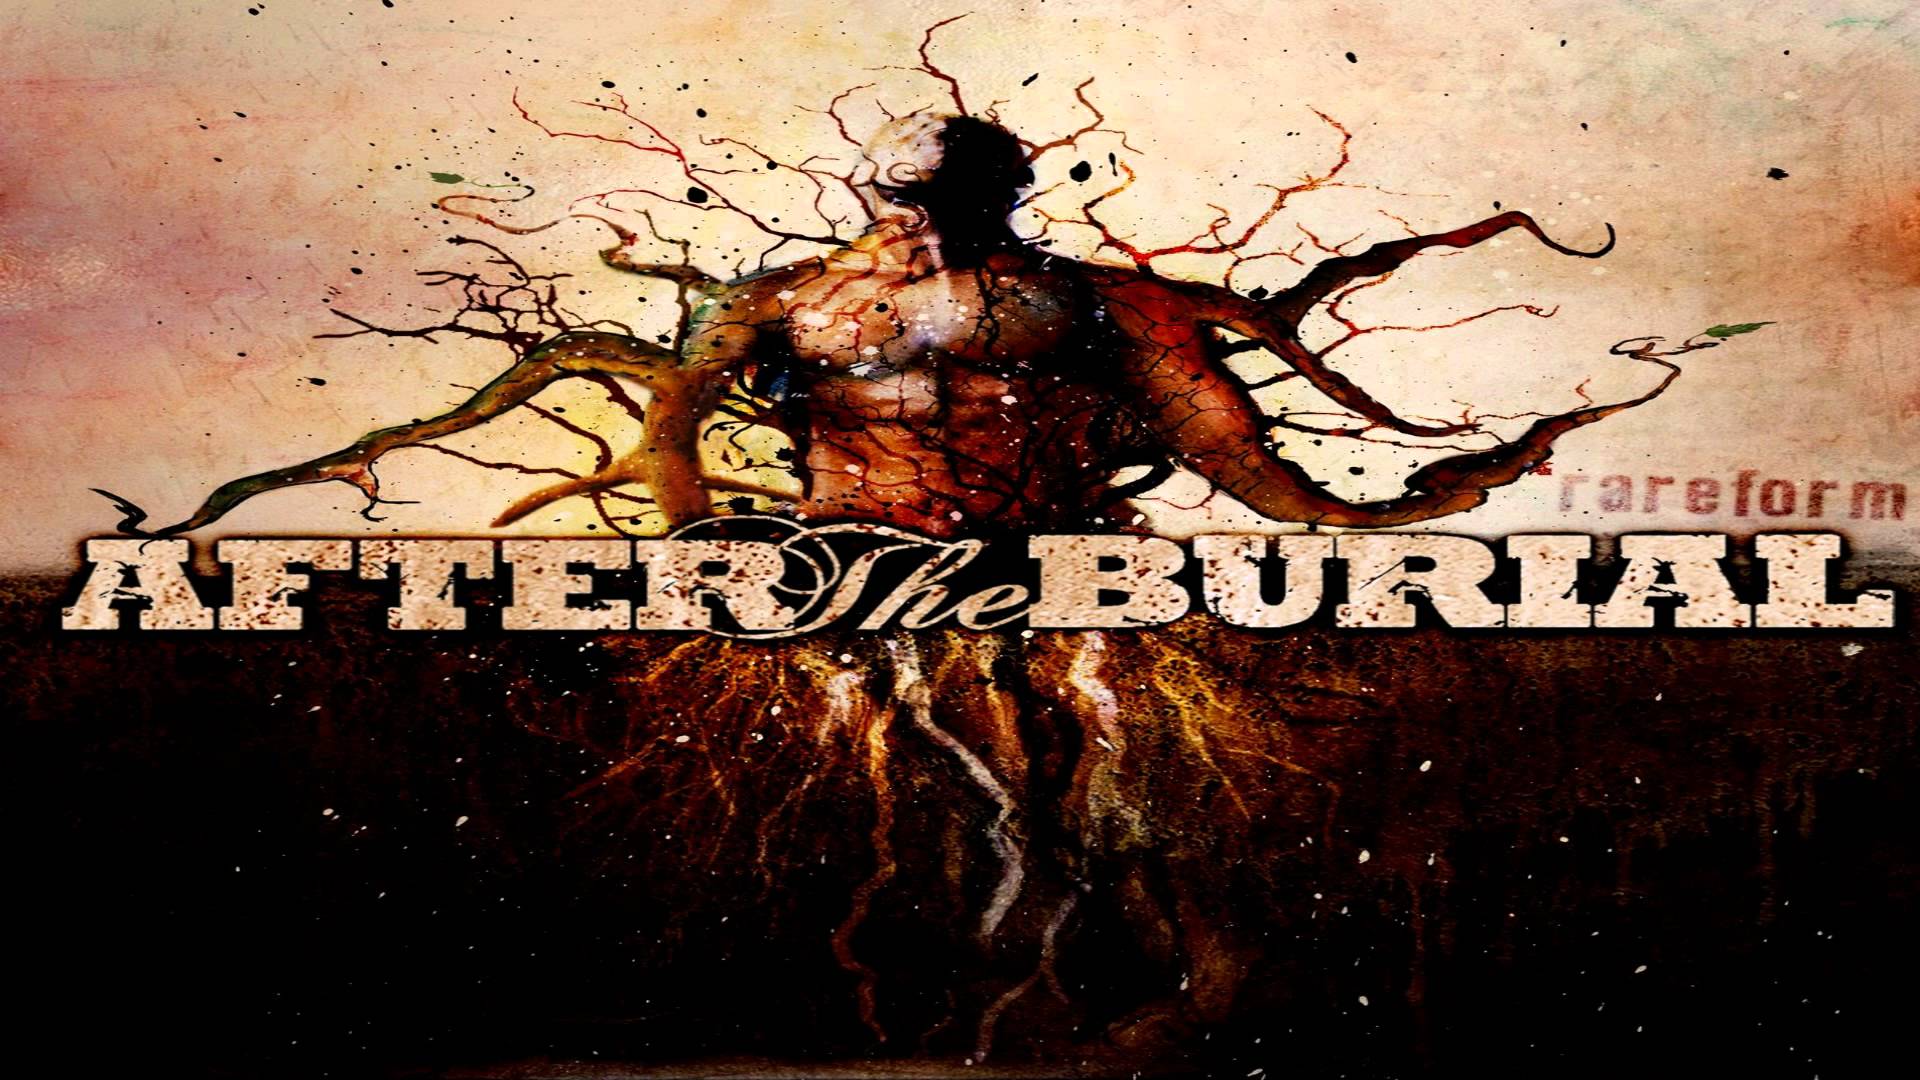 Nice wallpapers After The Burial 1920x1080px